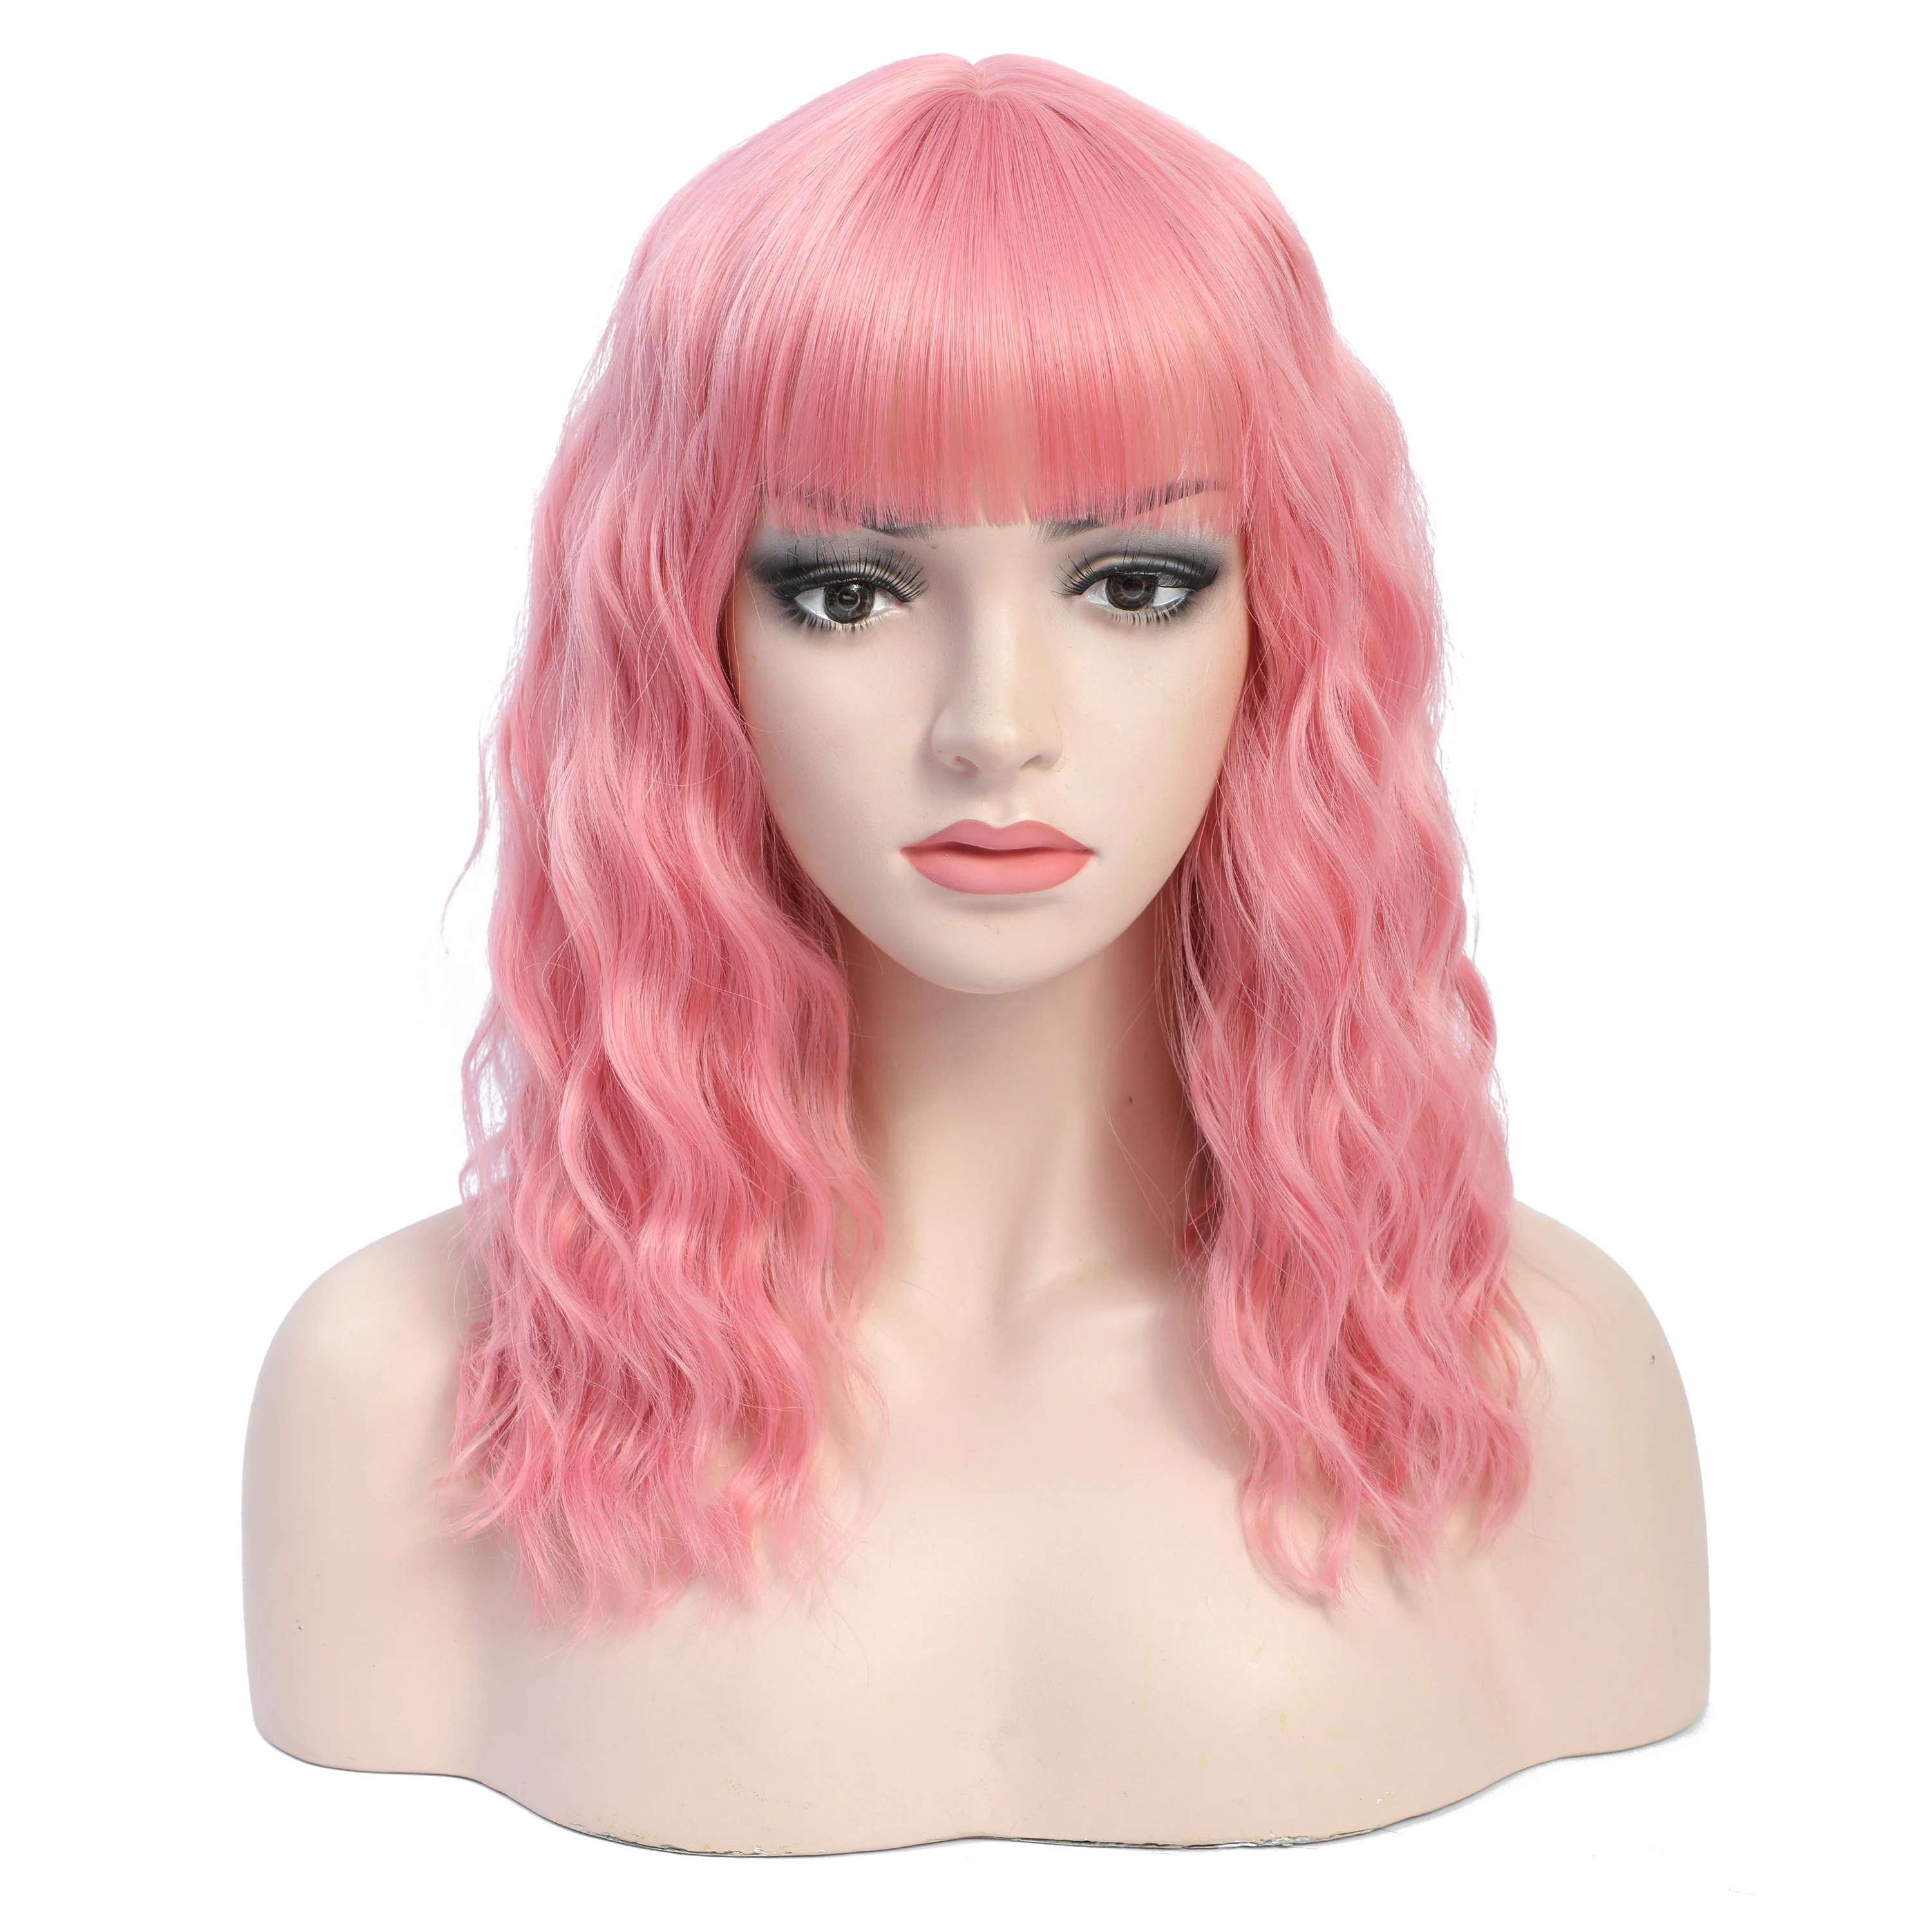 

16 Inches Long Wavy Pink Wigs For Women with Bangs For Femal Daily Use Cosplay Lolita Wigs Heat Resistant Toupee